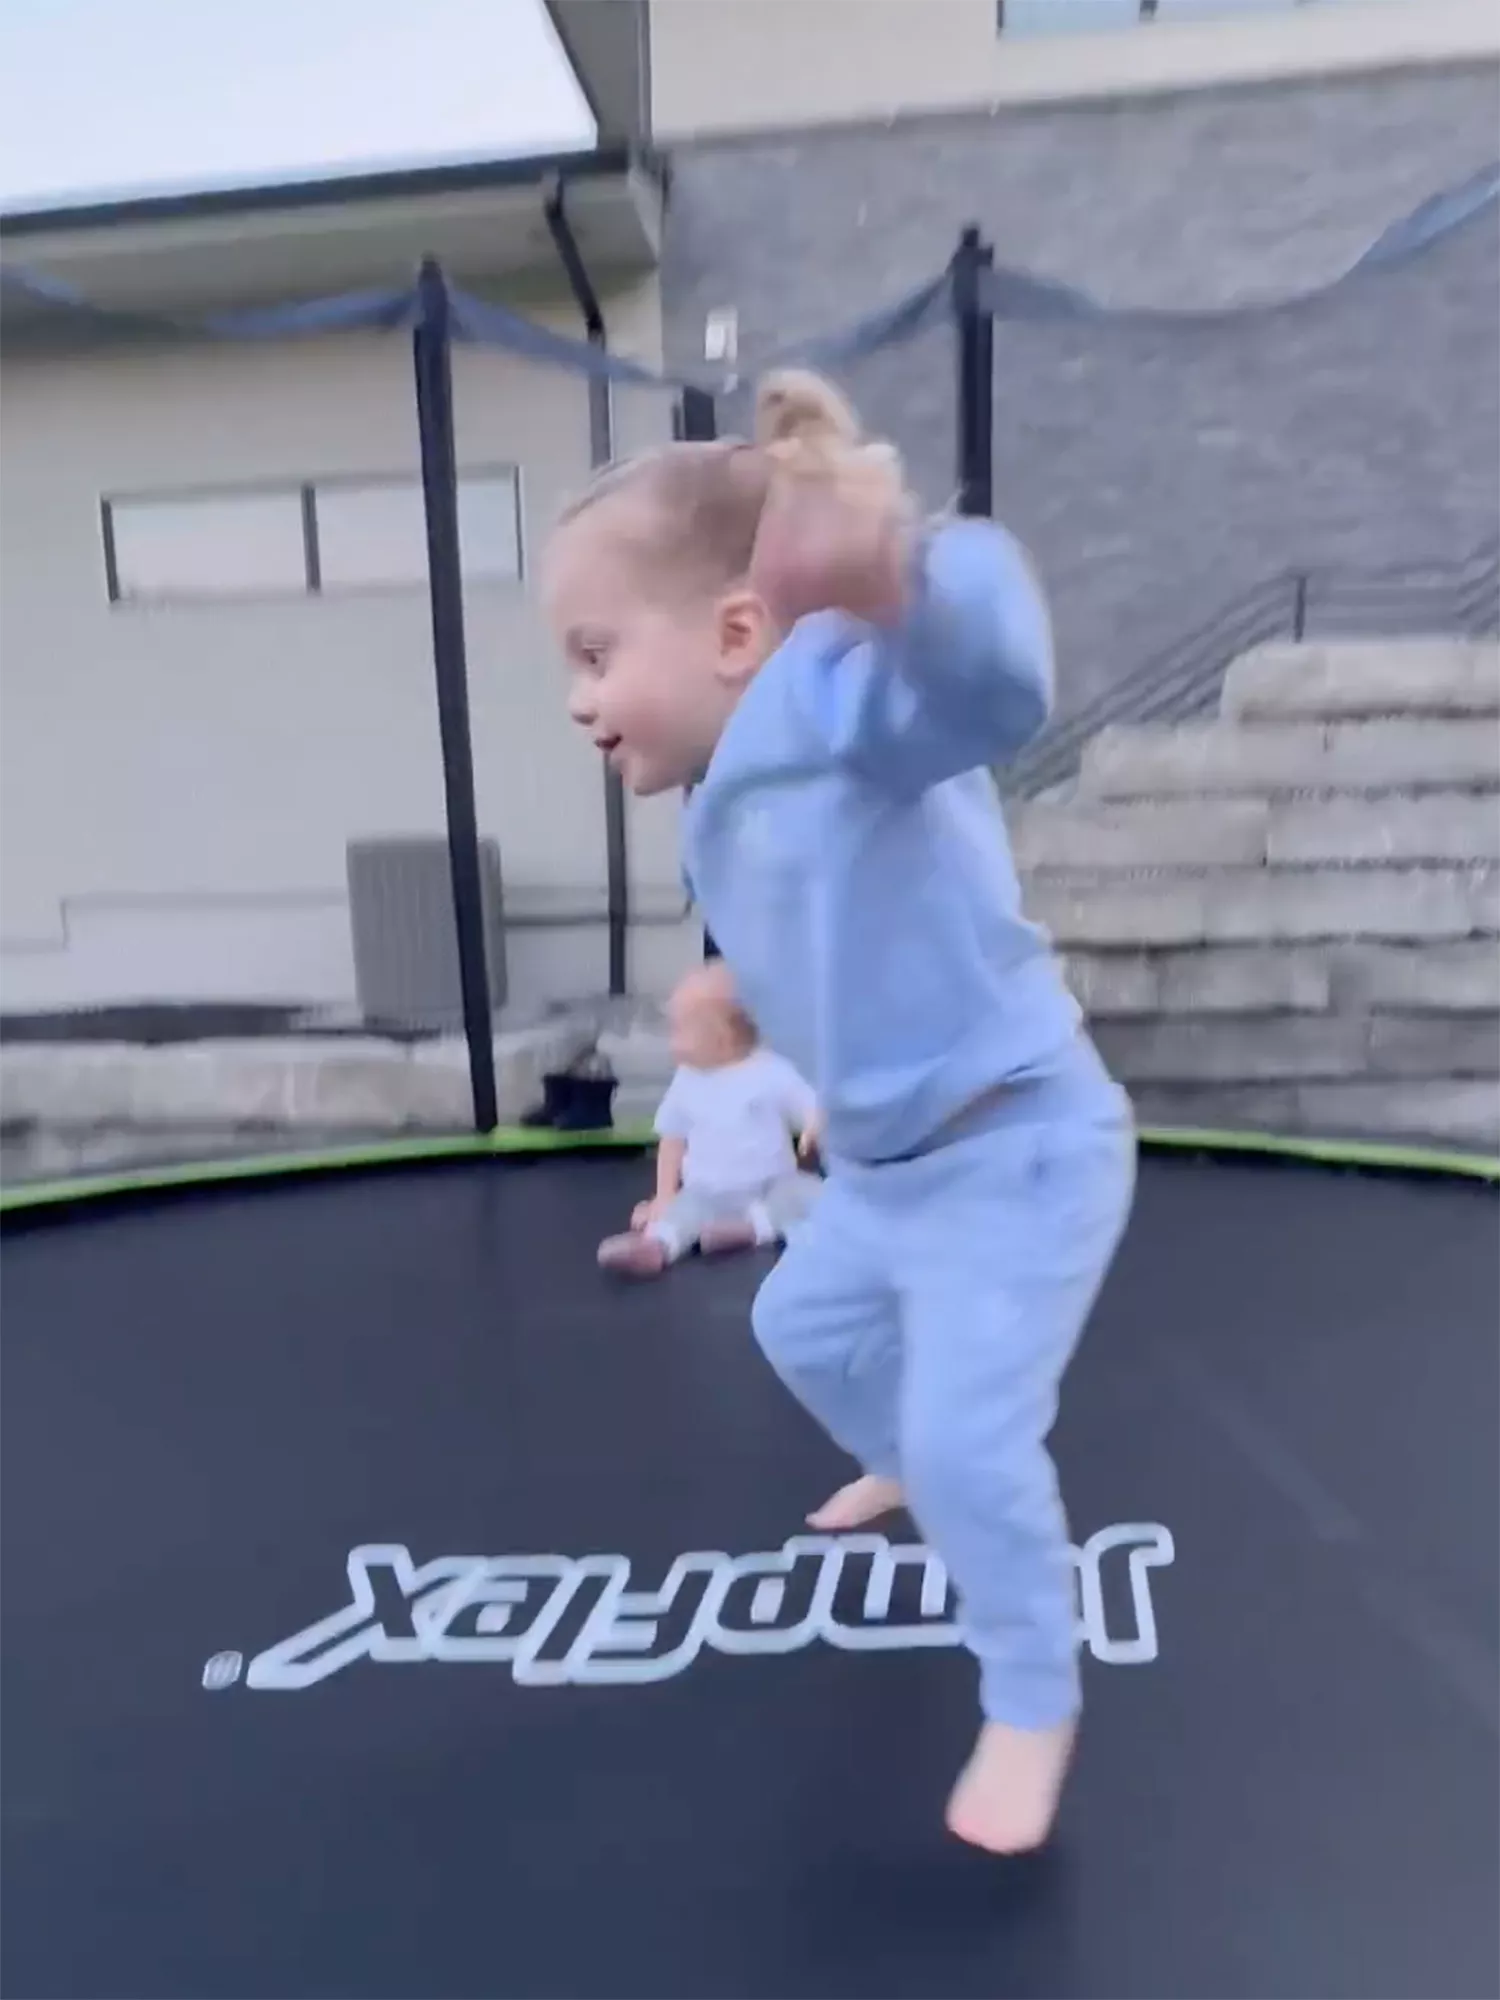 Brittany Mahomes Shares Adorable Video of Kids Playing on Backyard Trampoline 